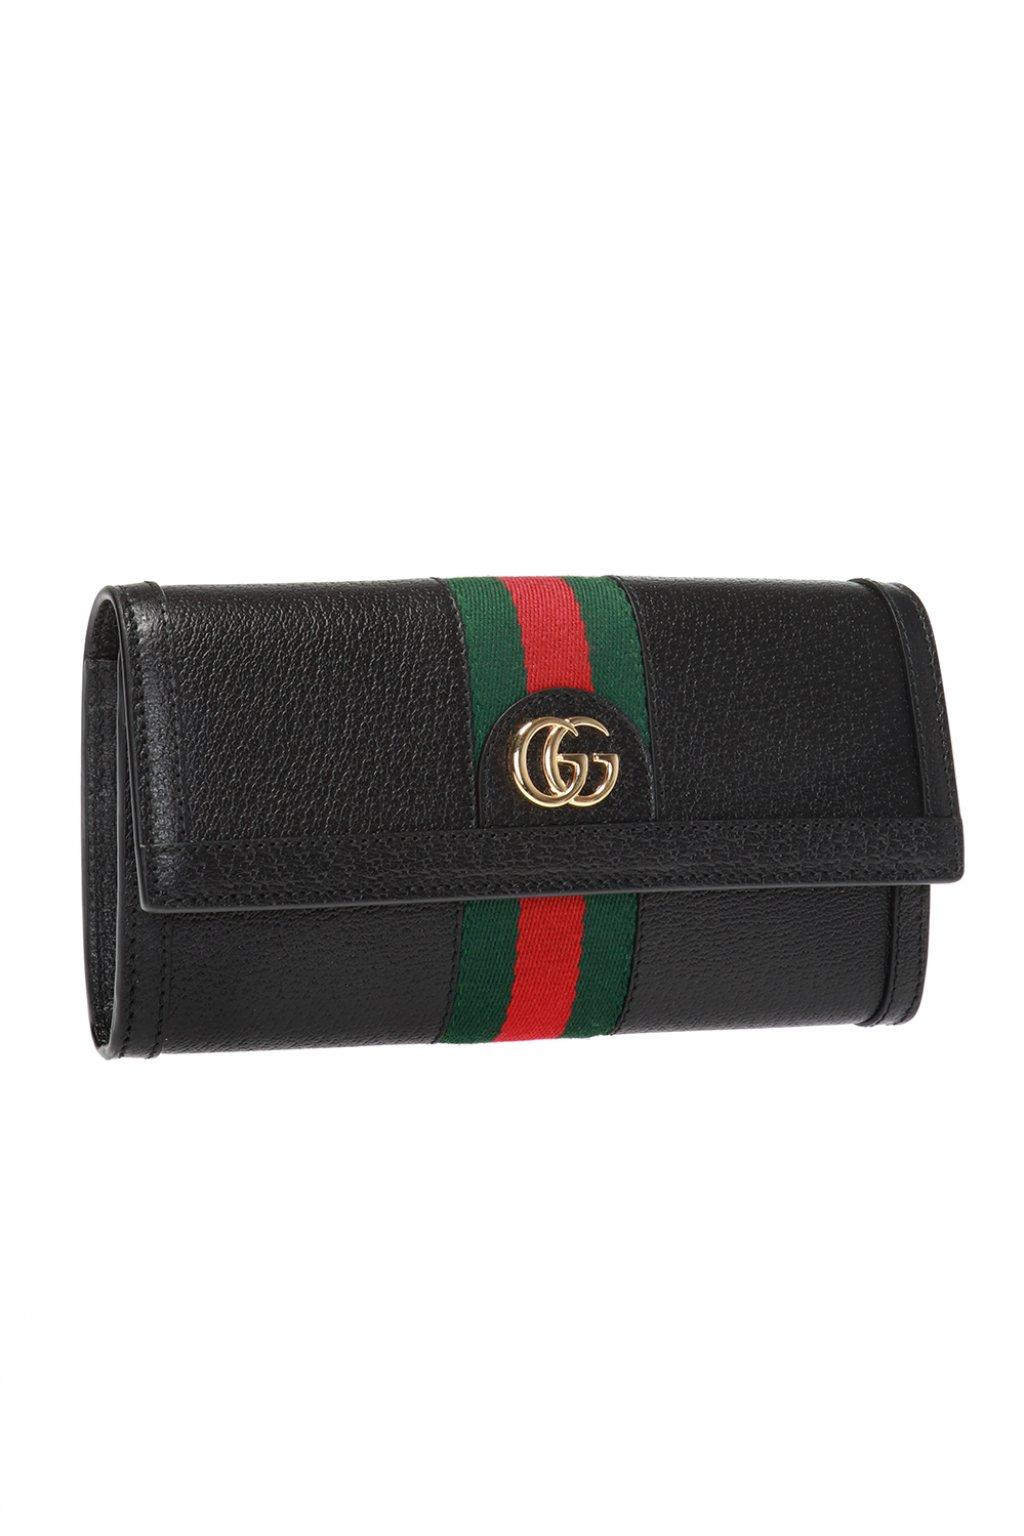 Gucci Leather Wallet With Web Stripe in Burgundy Black (Black) - Lyst